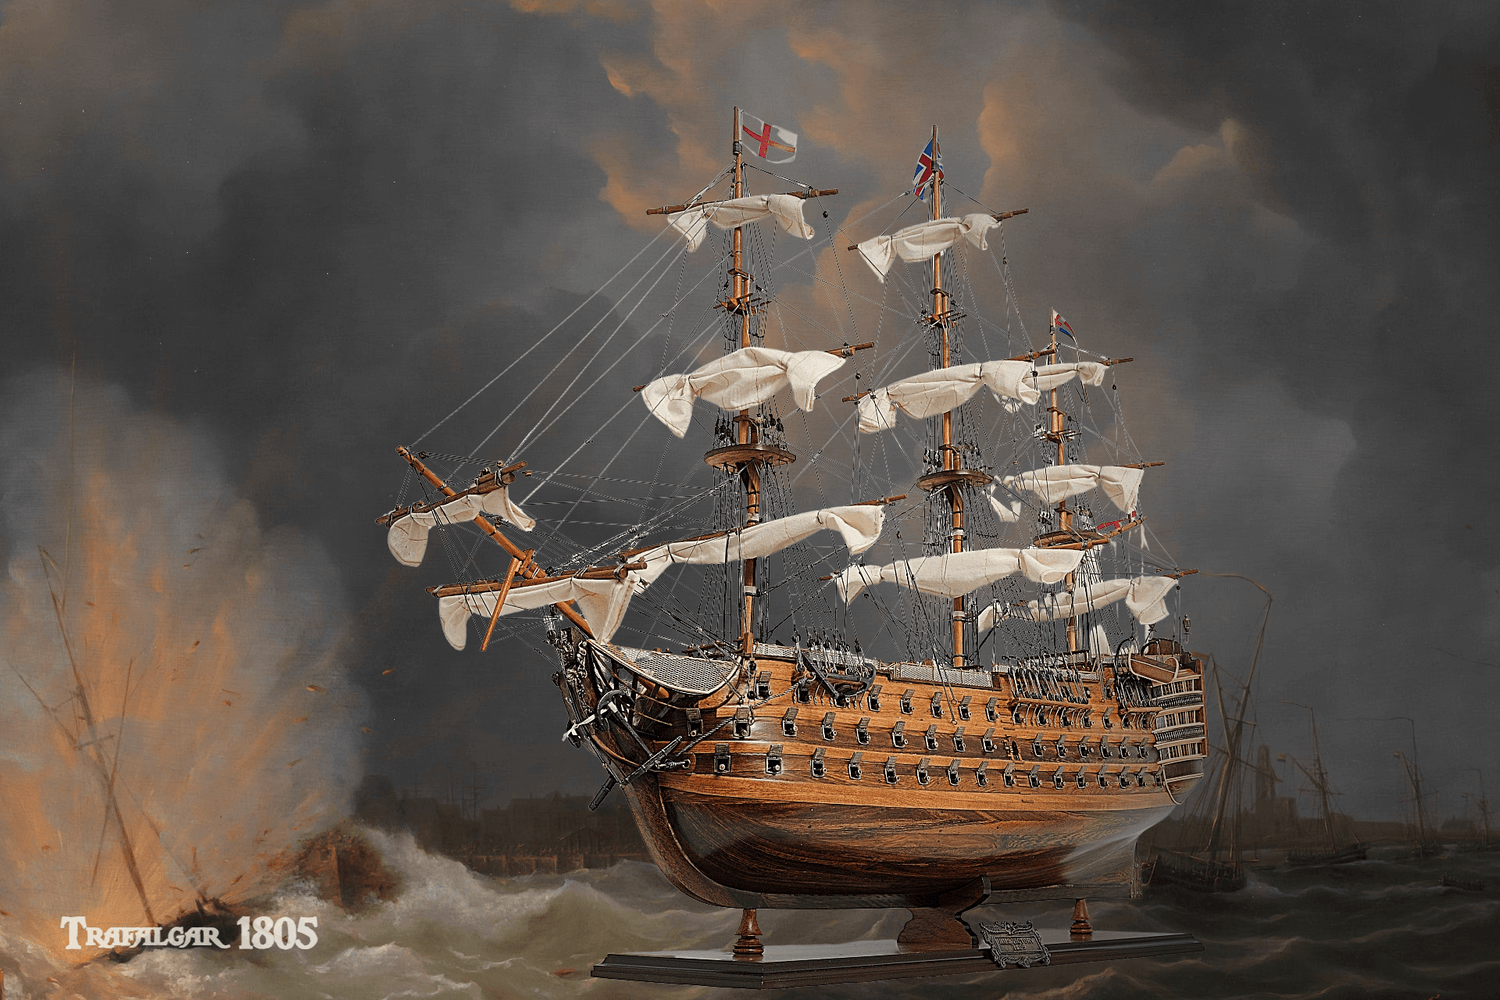 HMS Victory is a 104-gun first-rate ship of the line of the Royal Navy, ordered in 1758, laid down in 1759 and launched in 1765. She is best known for her role as Lord Nelson's flagship at the Battle of Trafalgar on 21 October 1805.